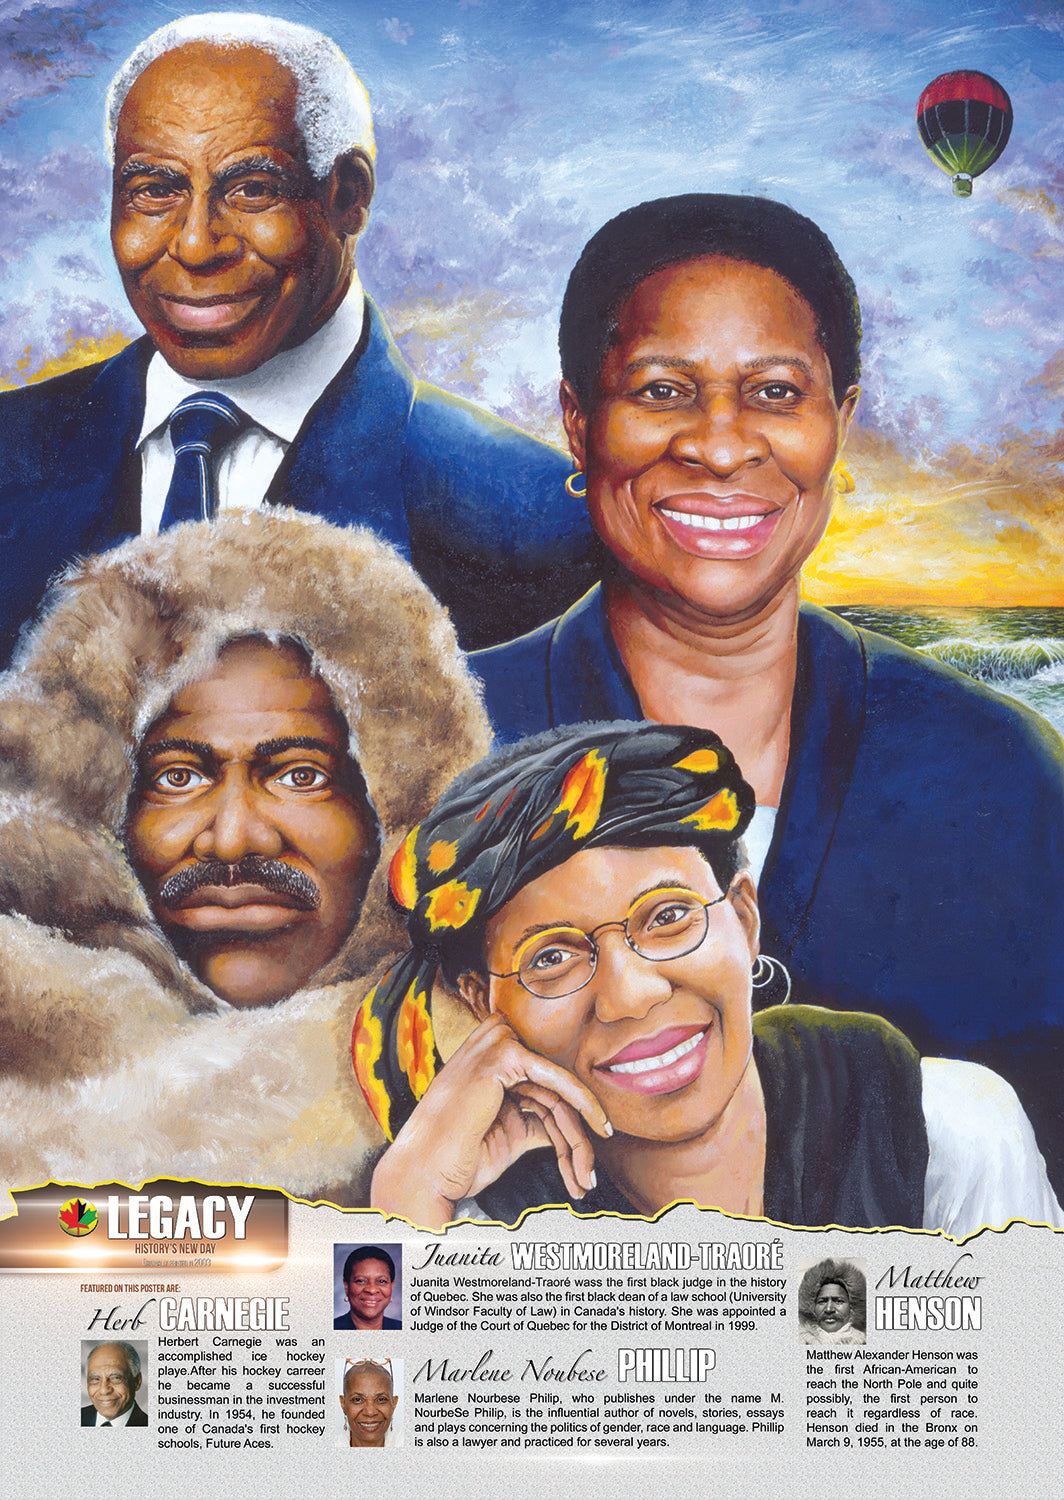 “An educational poster, ideal for Black History Month featuring hockey legend Herb Carnegie, judge Juanita Westmoreland-Traore, adventurer Matthew Henson and poet/writer Marlene Nourbese-Phillips created by African-Canadian artist Robert Small.”